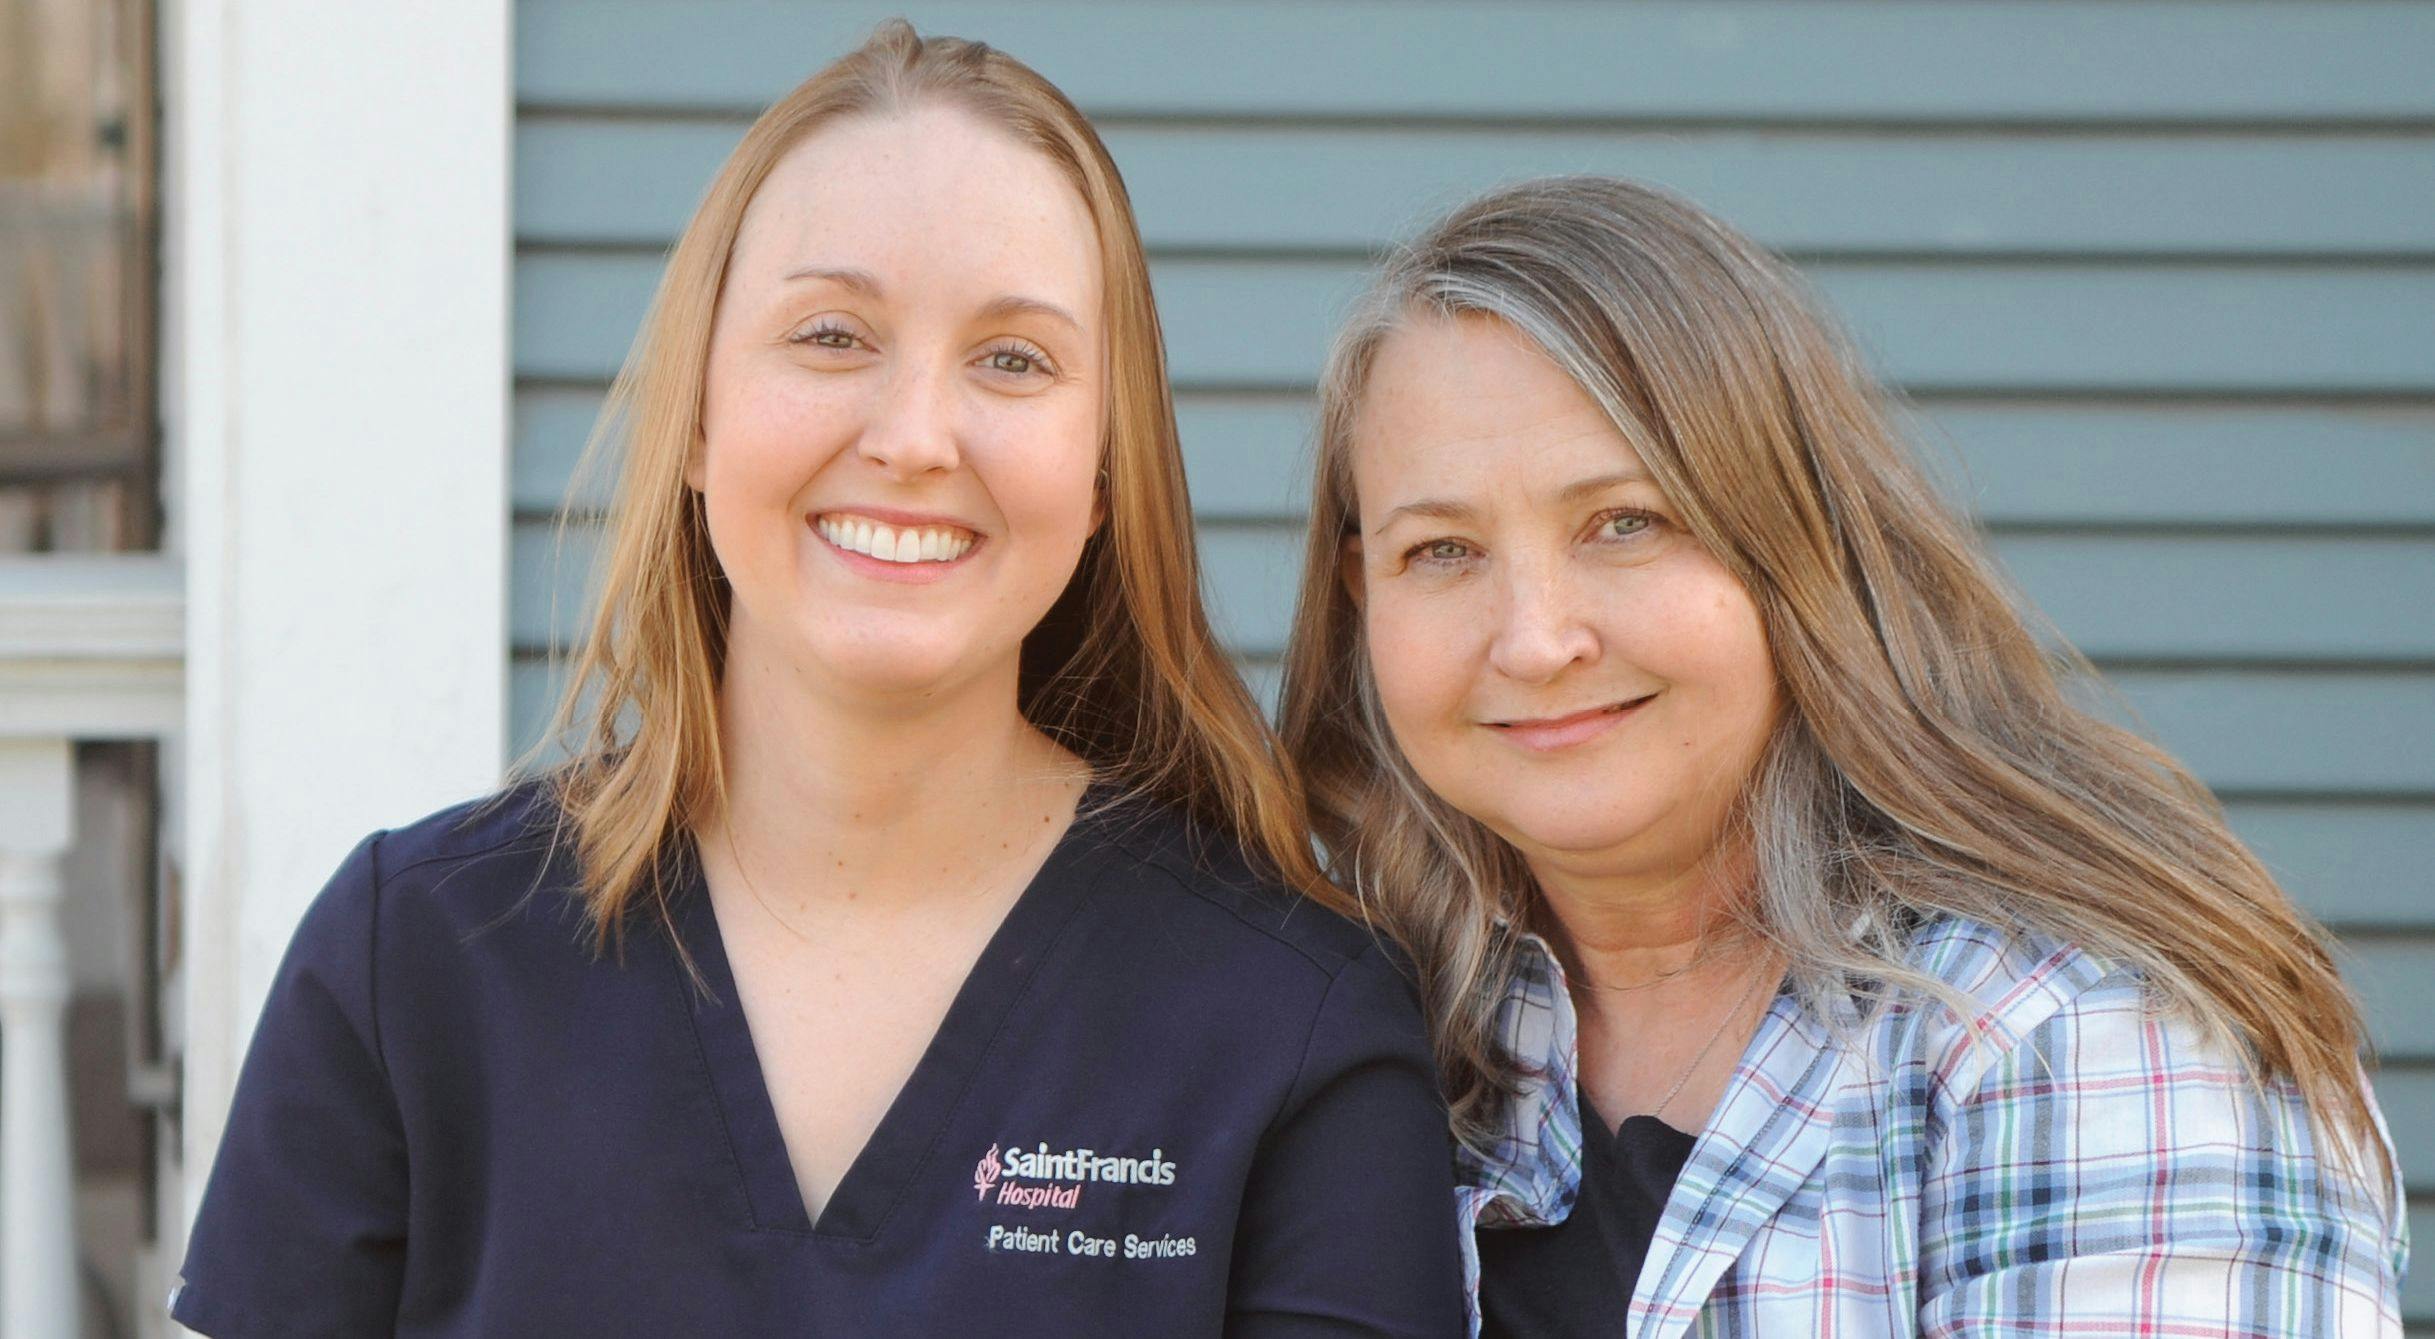 From left: Kaitlyn Whitewater, B.S.N. RN, and Debbie Talley
 - PHOTOS BY ERIN GOODRICH